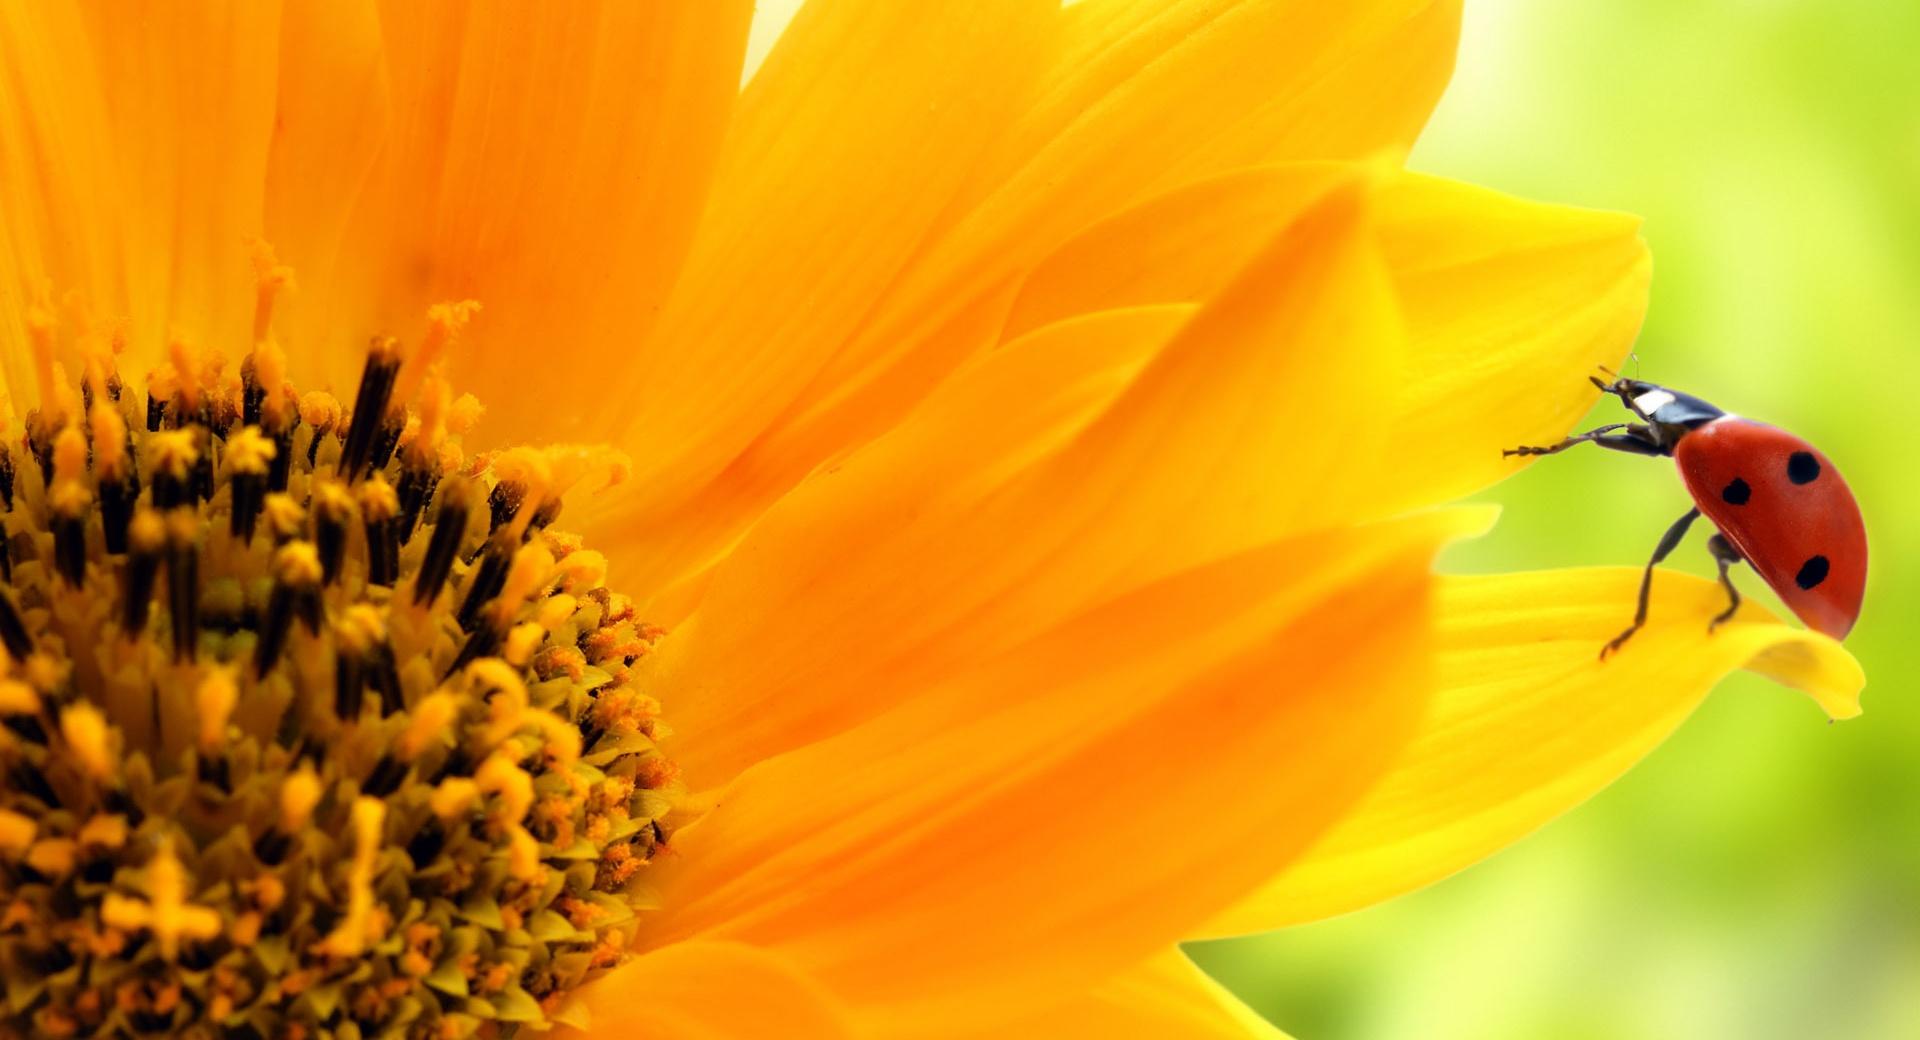 Sunflower And Ladybug wallpapers HD quality